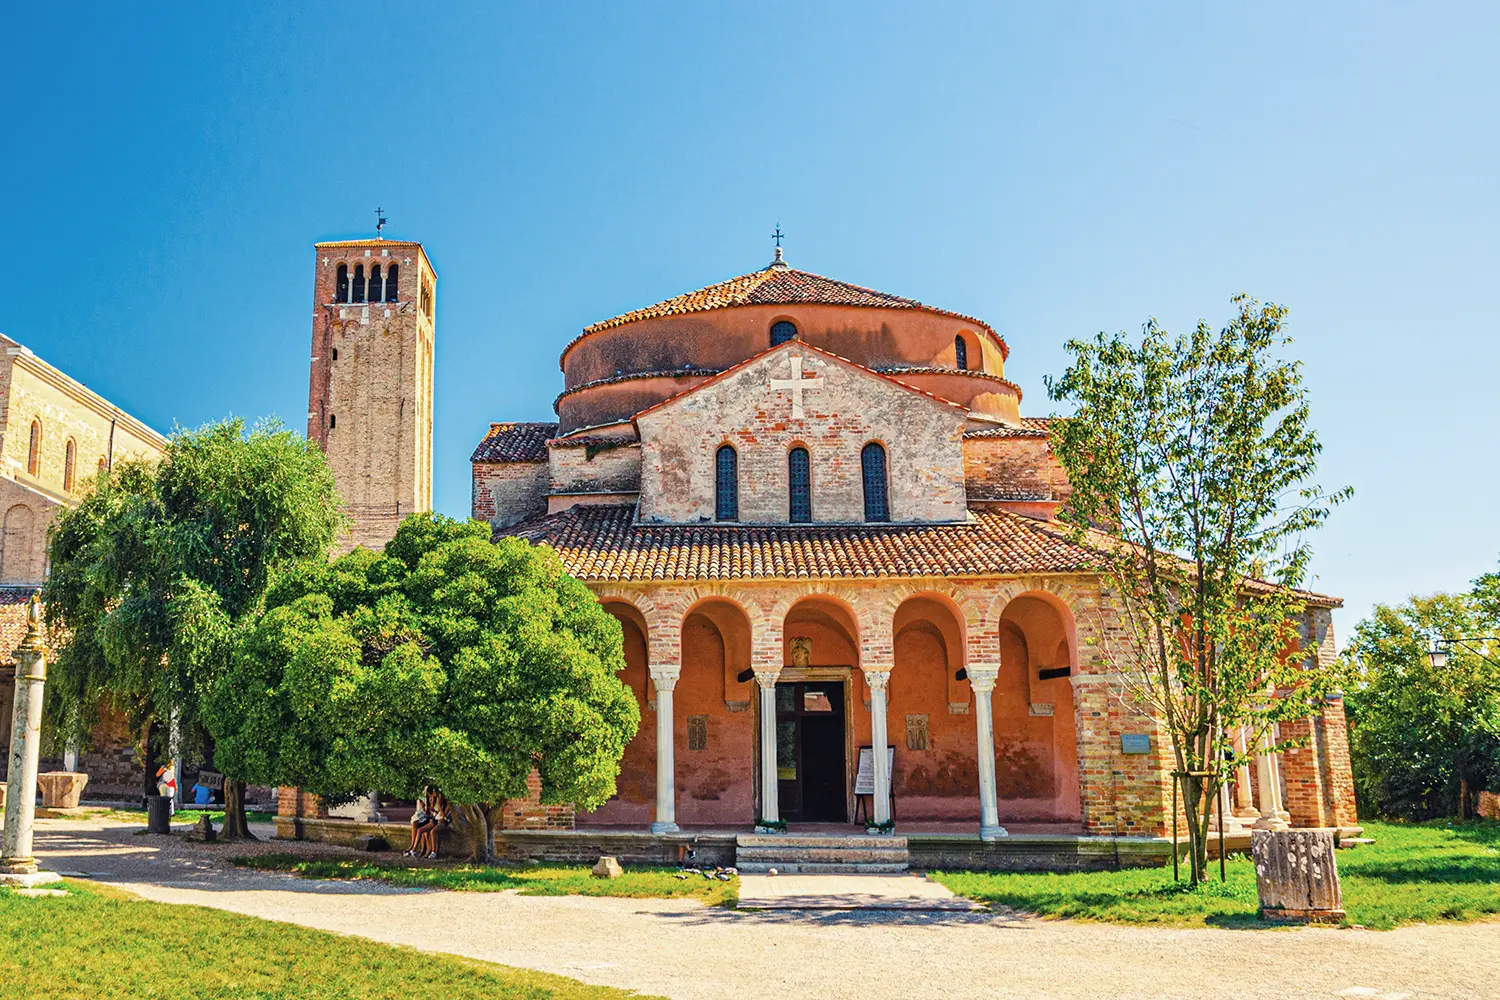 Church of Santa Fosca building on Torcello island, Cathedral of Santa Maria Assunta with bell tower campanile, blue clear sky background. Venetian Lagoon, Veneto Region, Northern Italy.